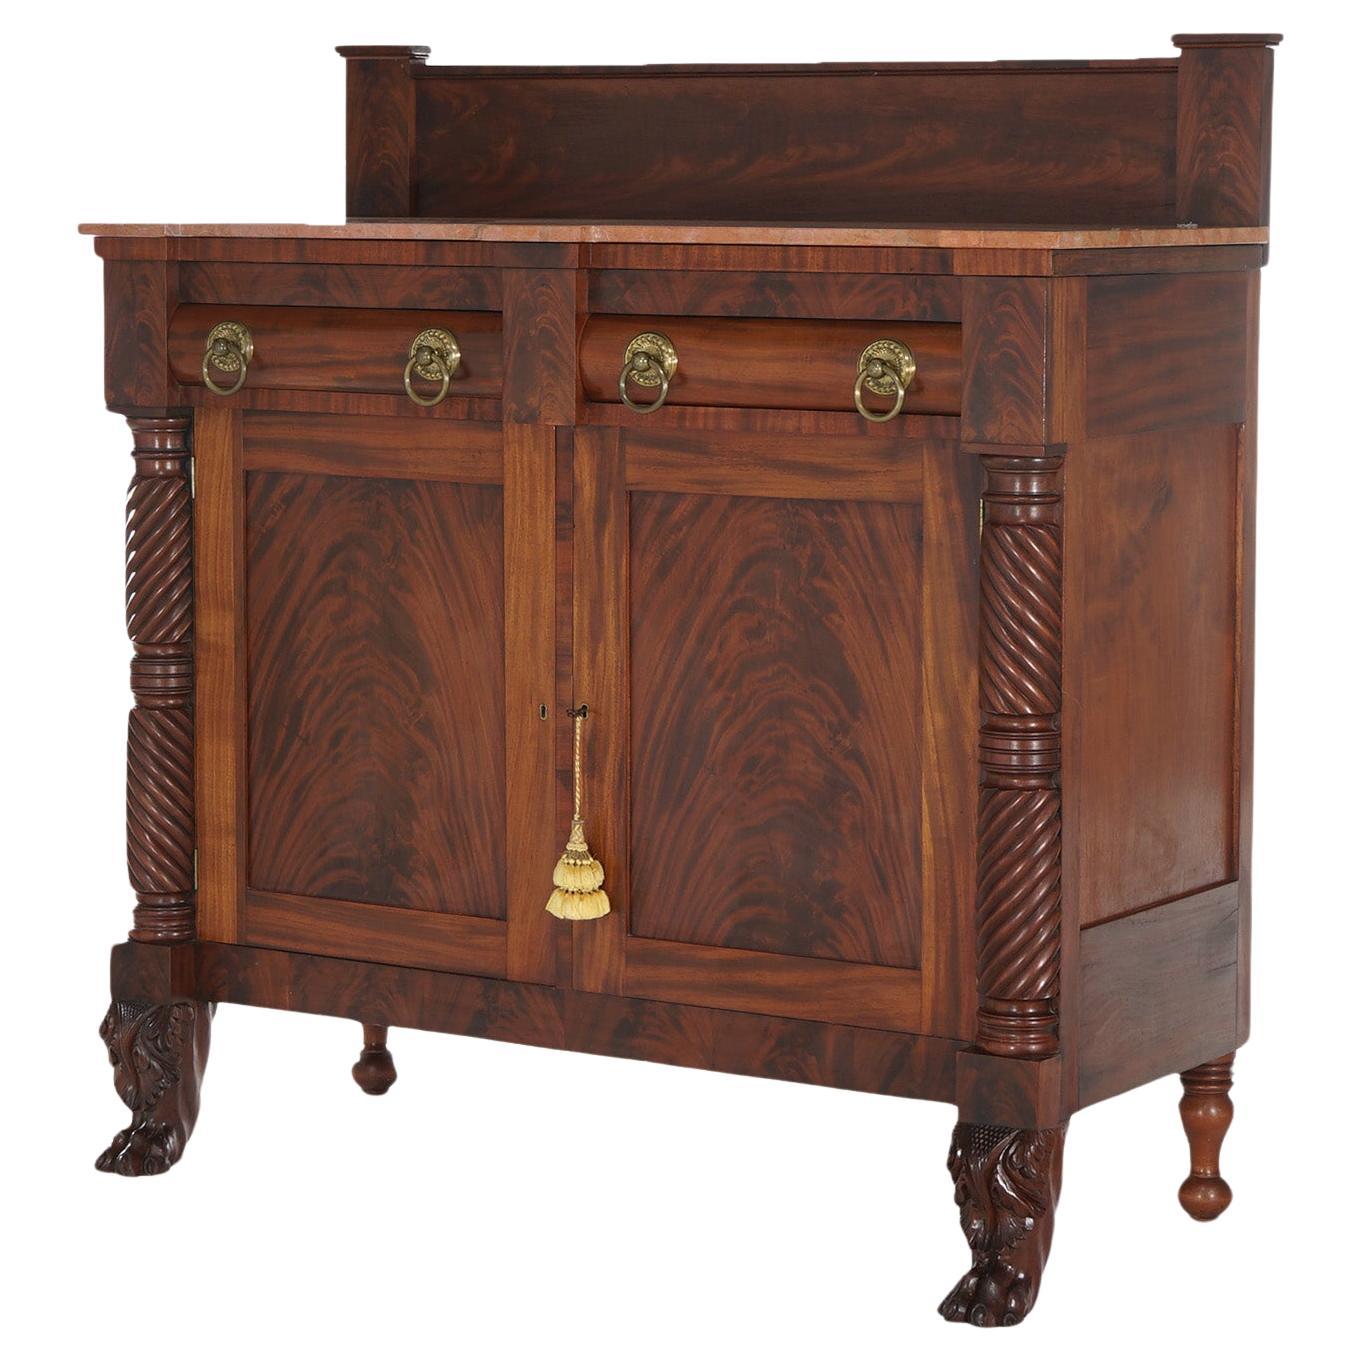 Antique American Empire Flame Mahogany Marble Top Linen Press Sideboard C1840 For Sale